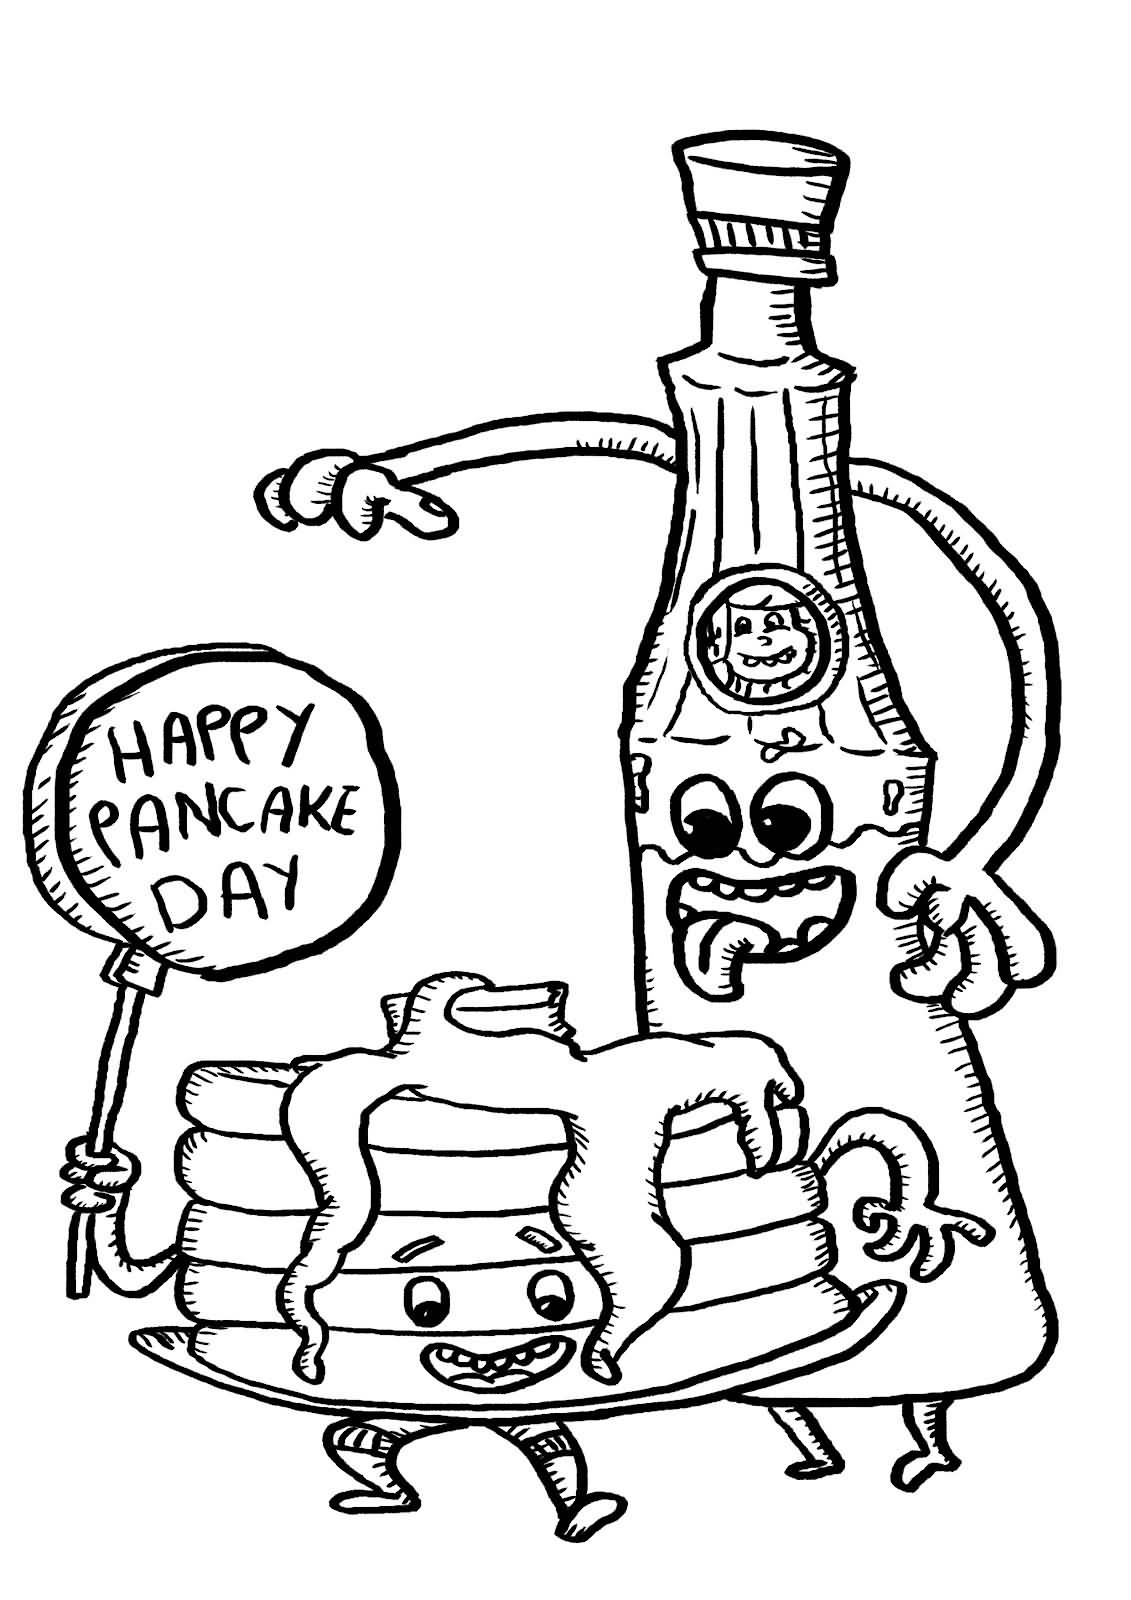 Happy Pancake Day Honey Bottle And Pancake Coloring Page